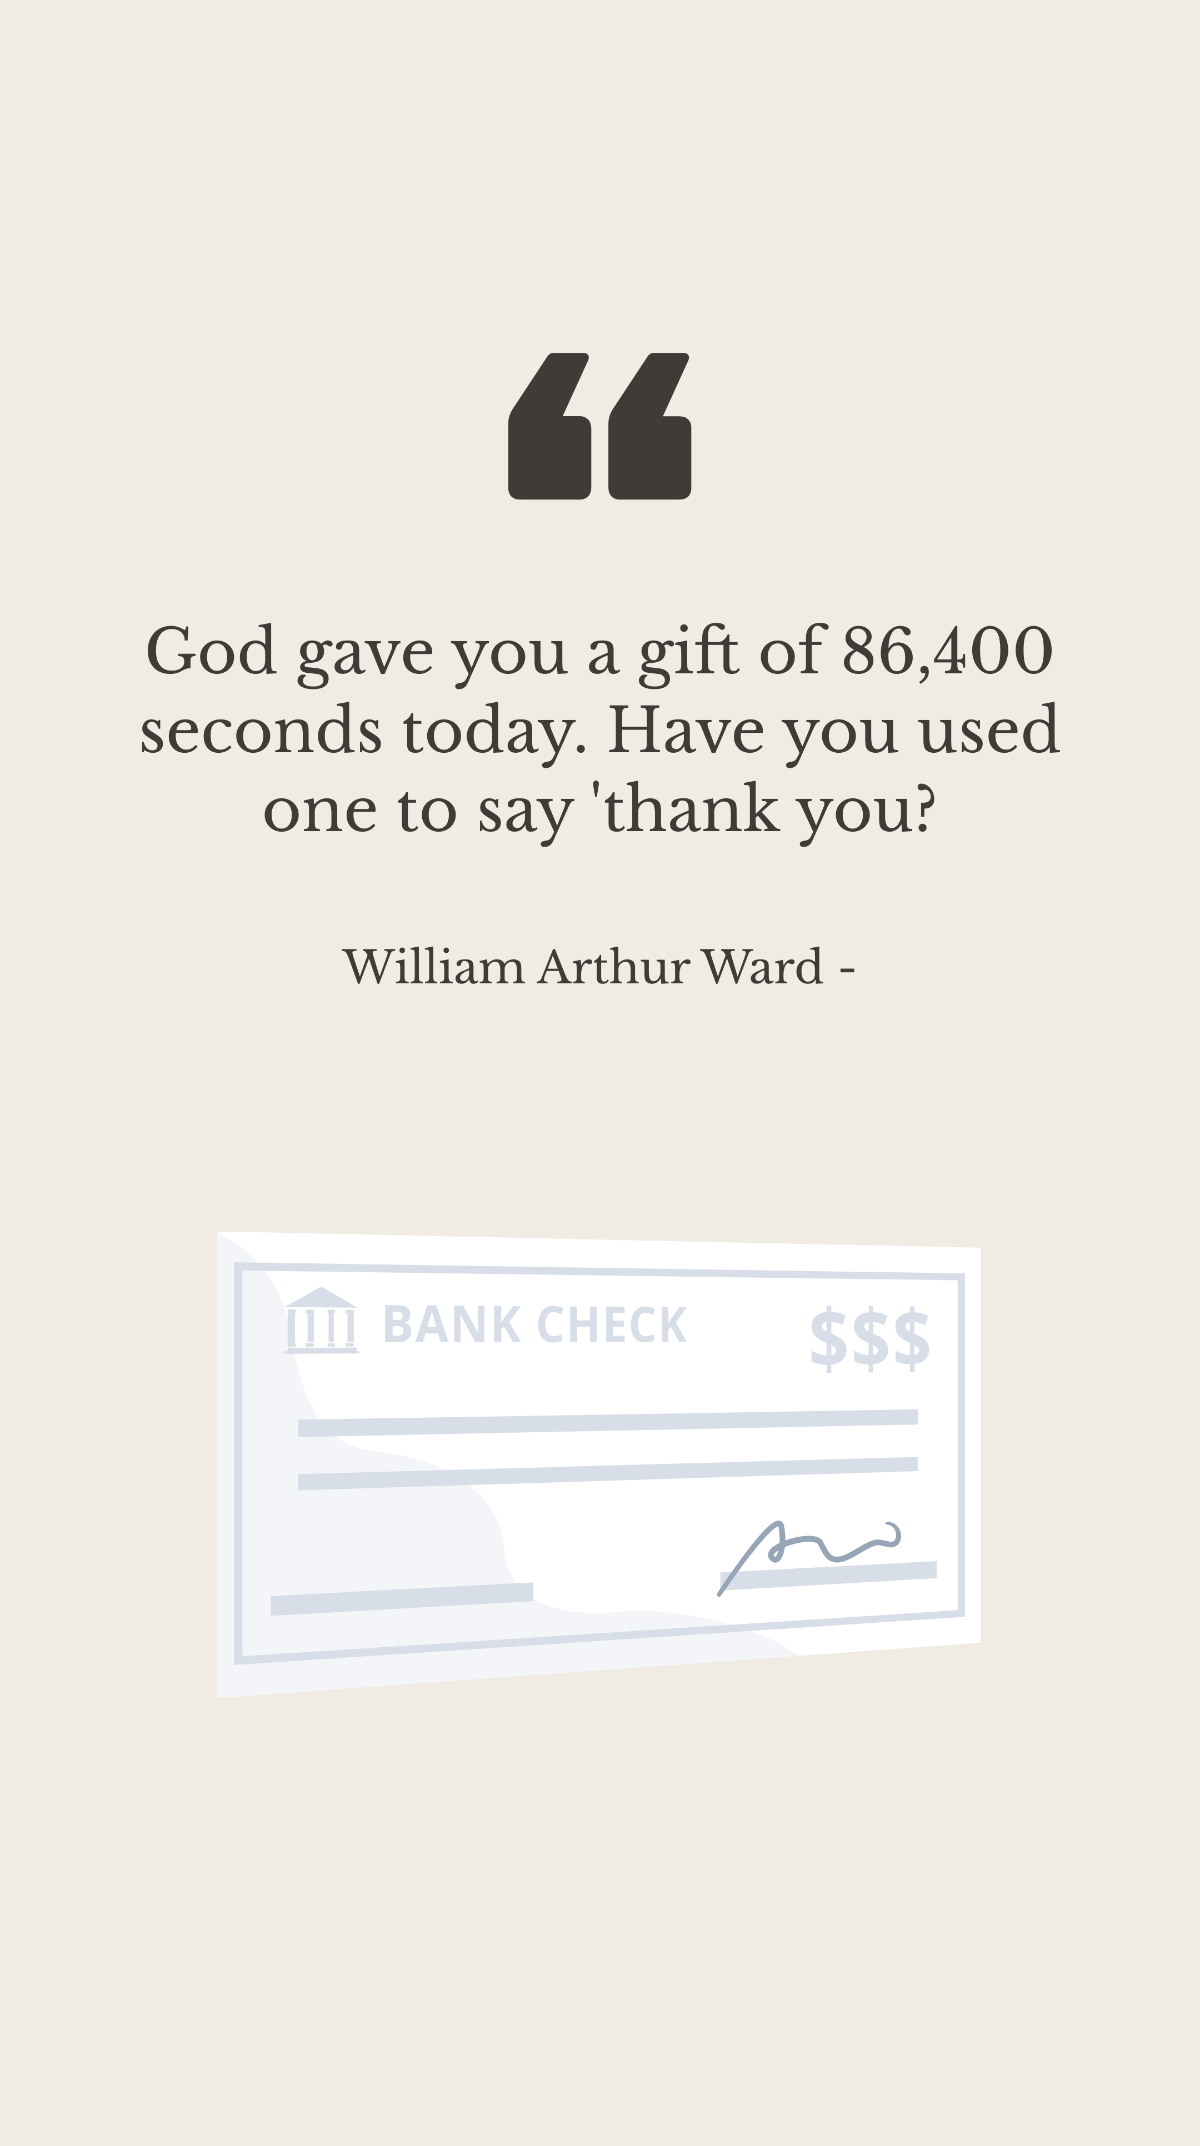 Free William Arthur Ward - God gave you a gift of 86,400 seconds today. Have you used one to say 'thank you? Template